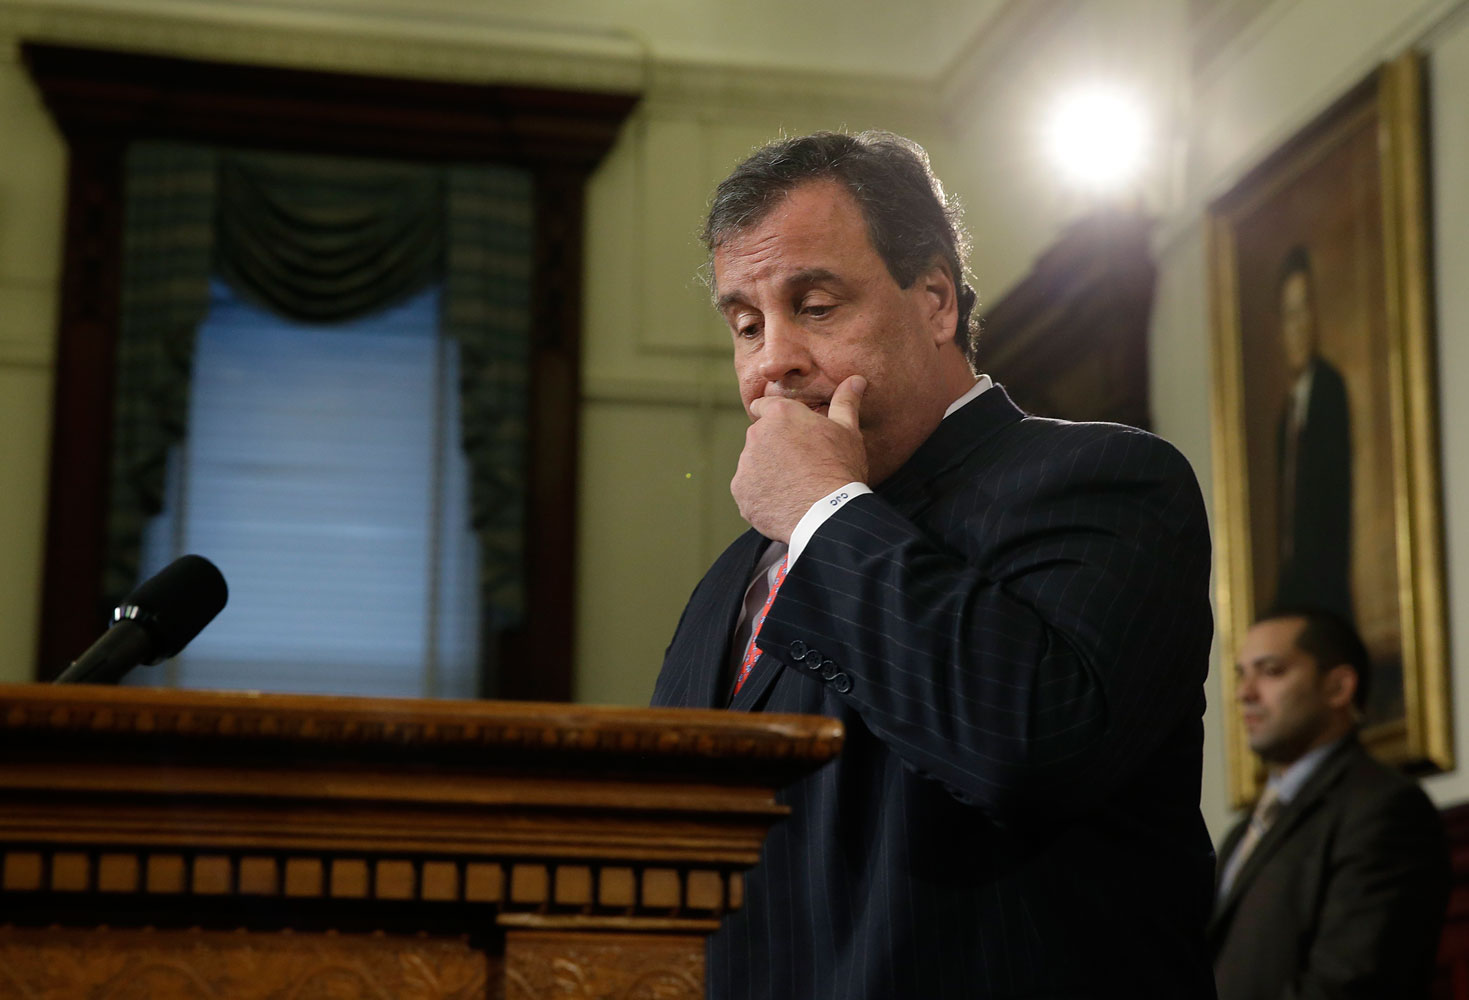 New Jersey Gov. Chris Christie pauses as he addresses the media during a news conference  Jan. 9, 2014, at the Statehouse in Trenton. (Mel Evans / AP)